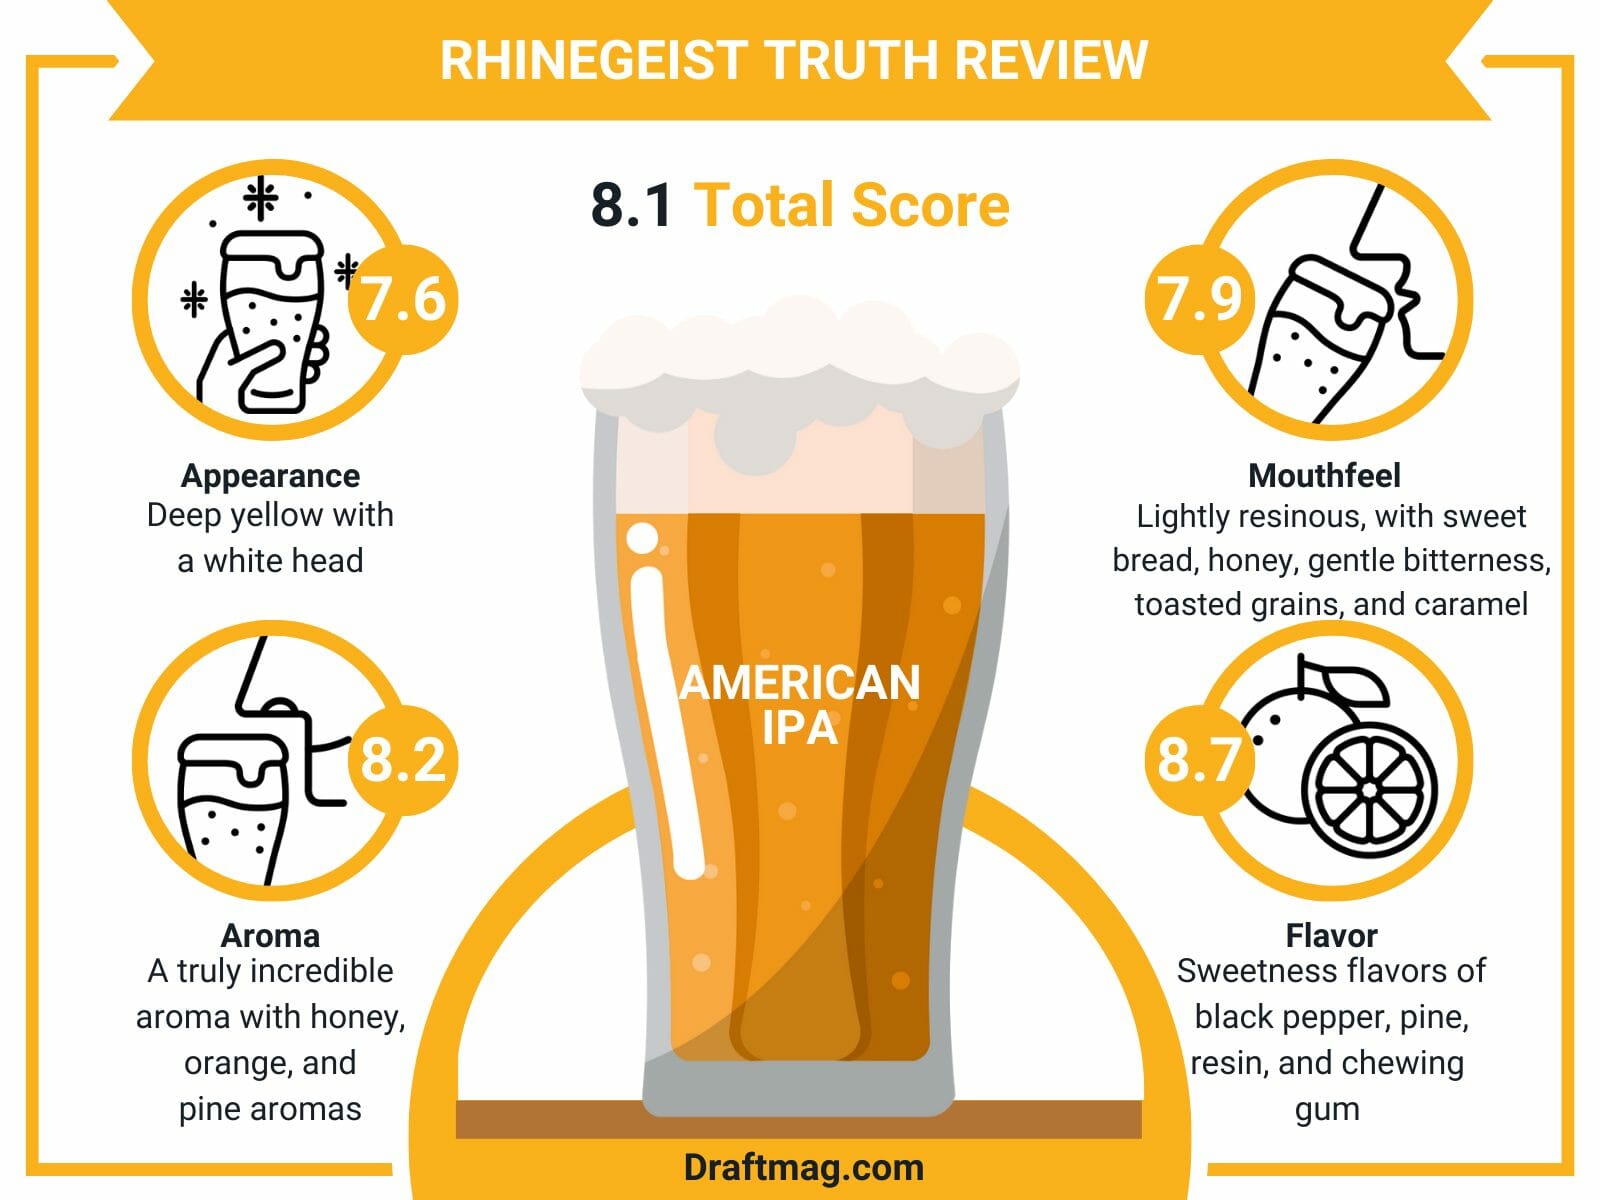 Rhinegeist truth review infographic